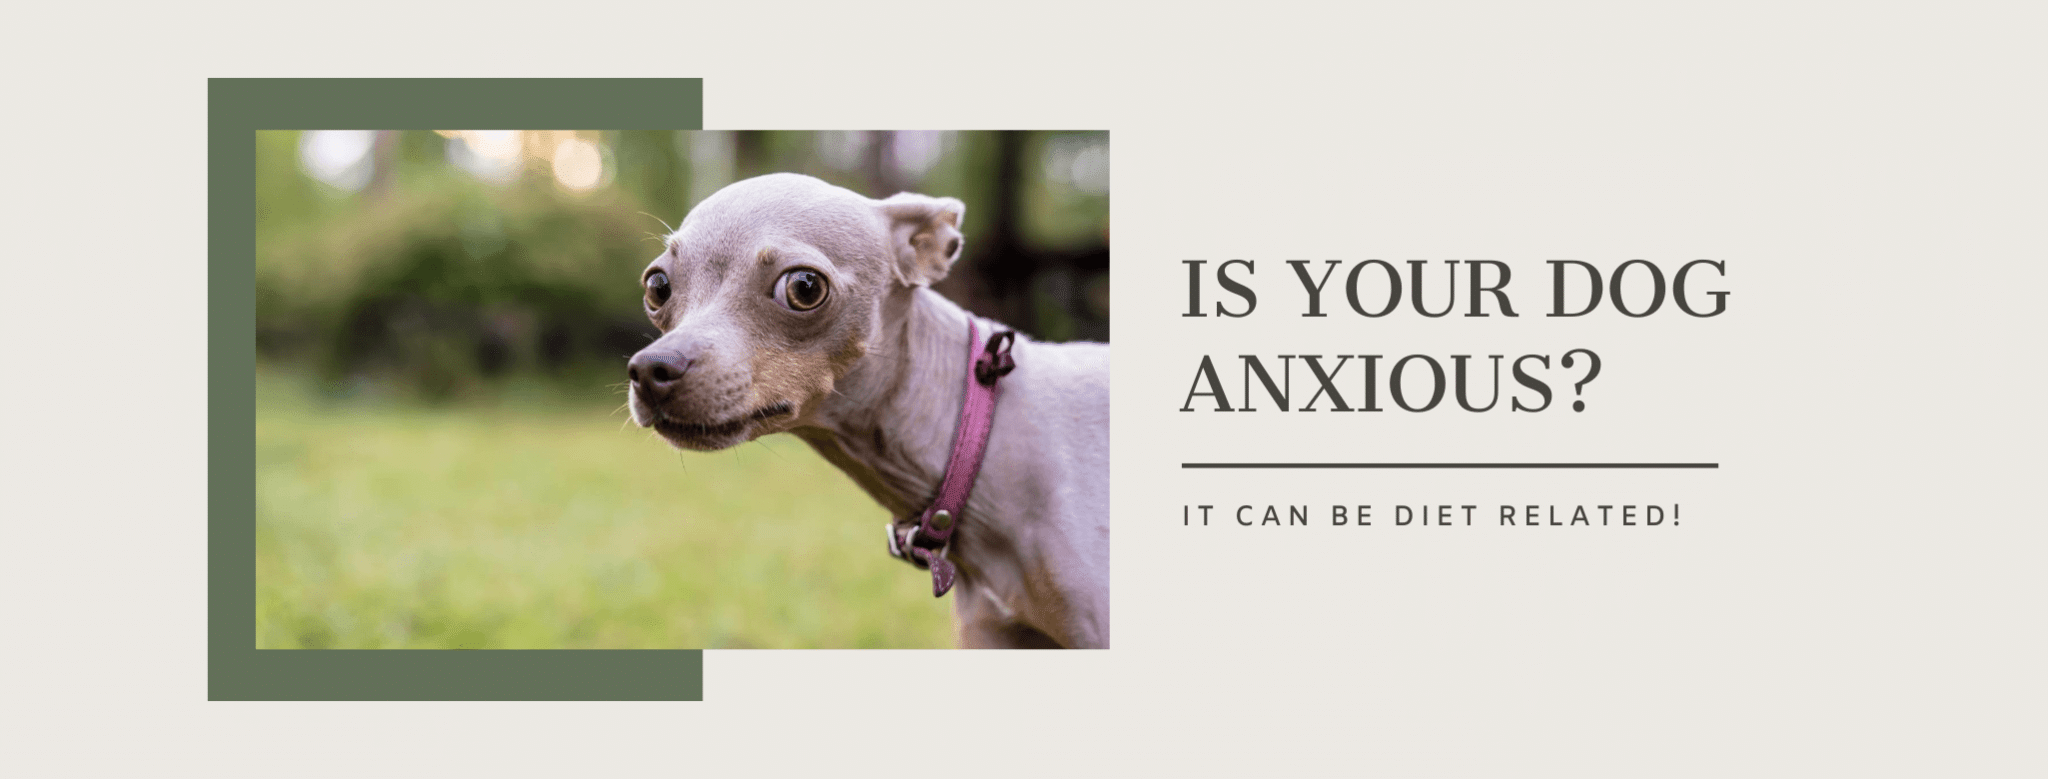 WHAT ARE THE SIGNS OF ANXIETY IN DOGS?